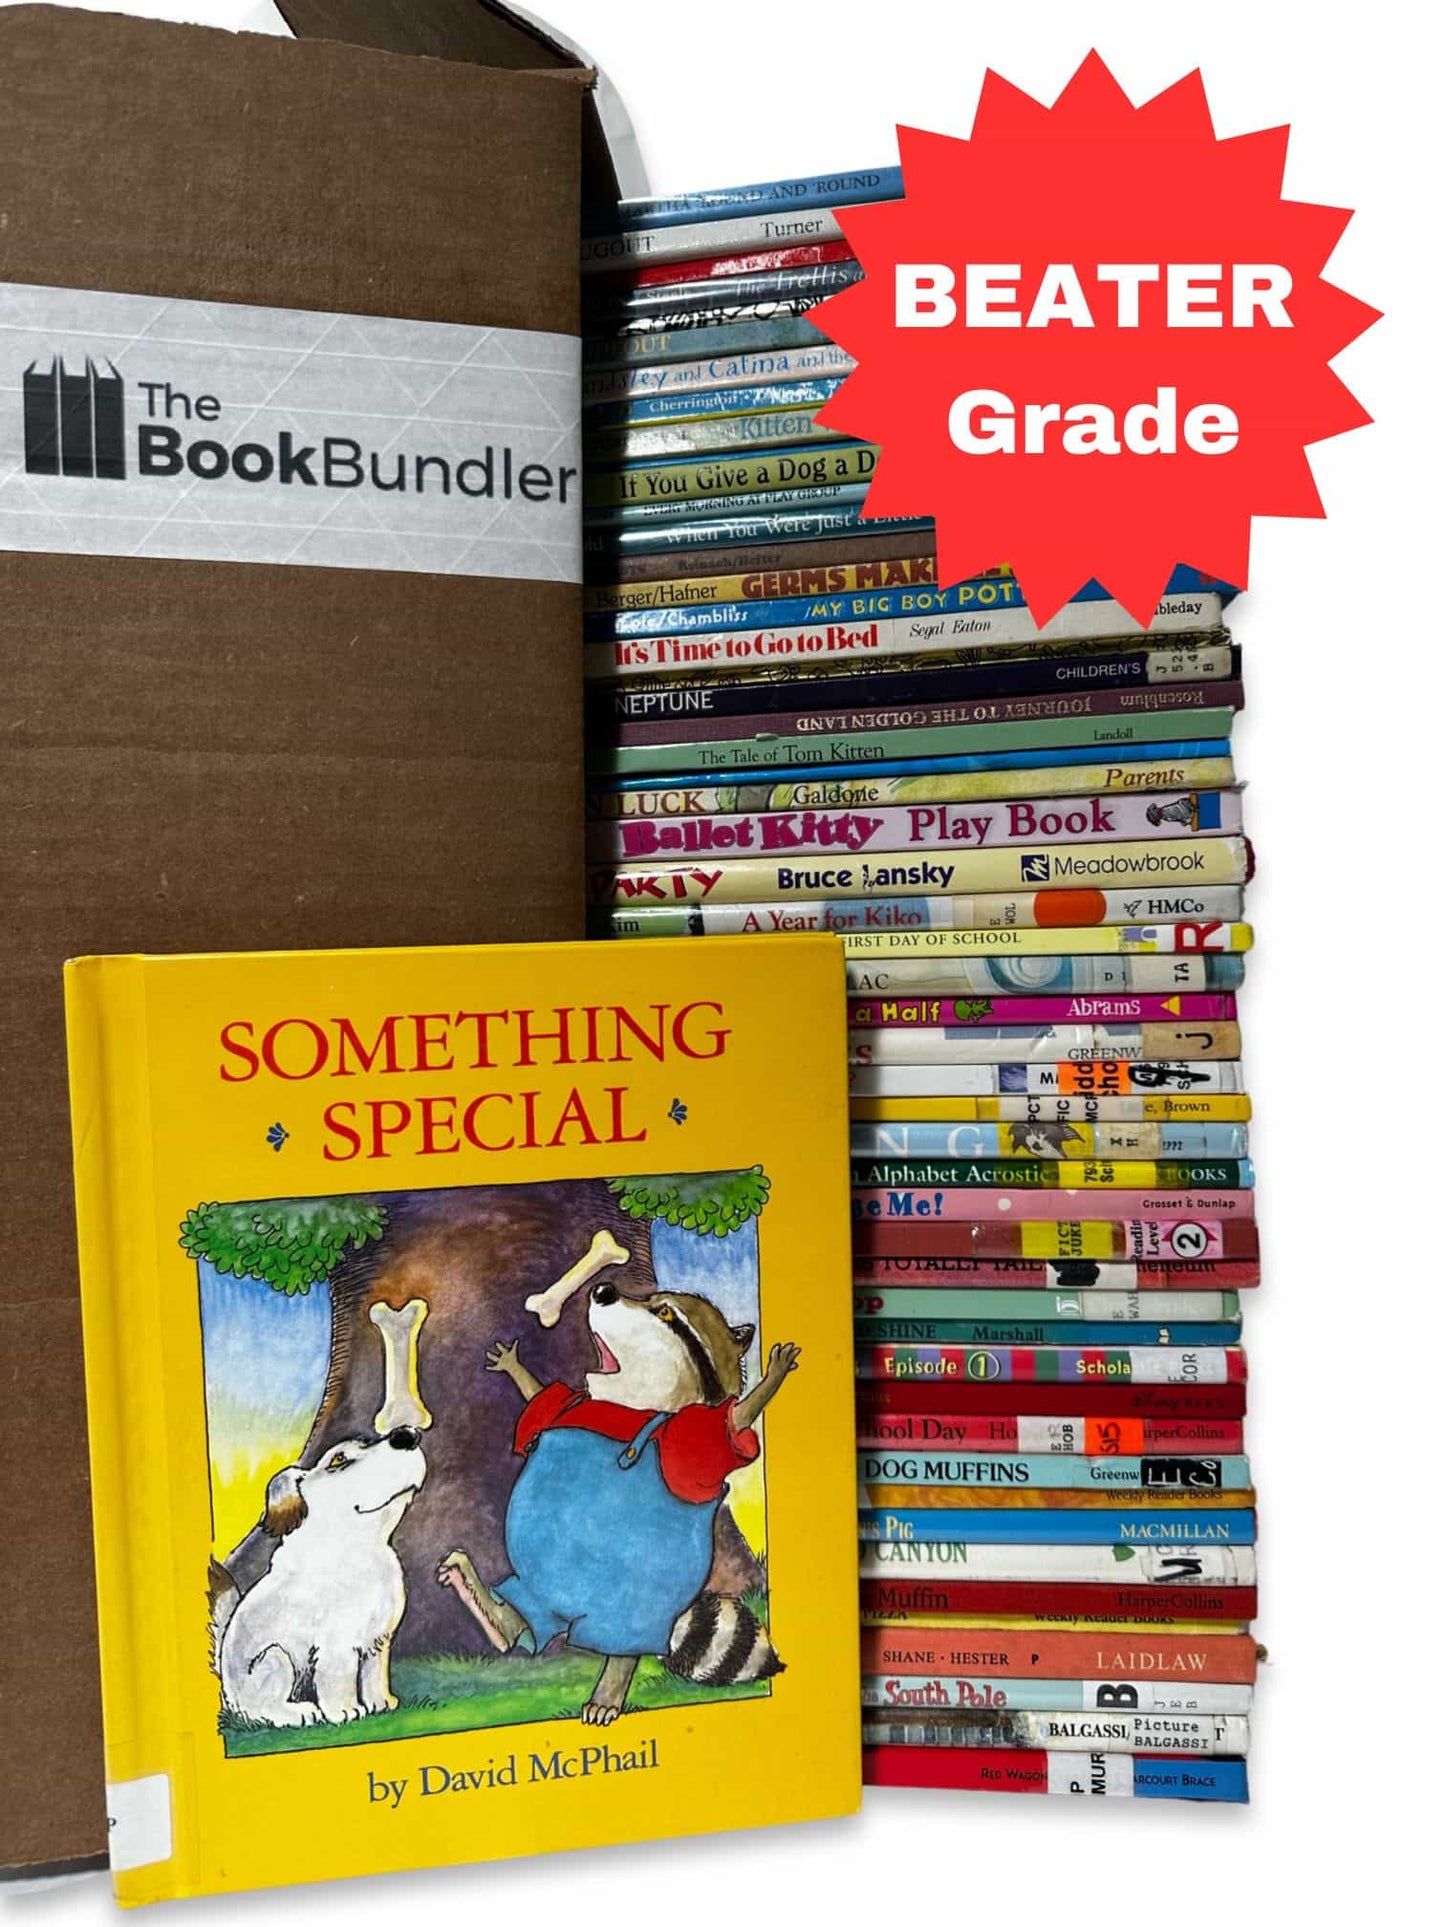 BEATER Small hardcover books